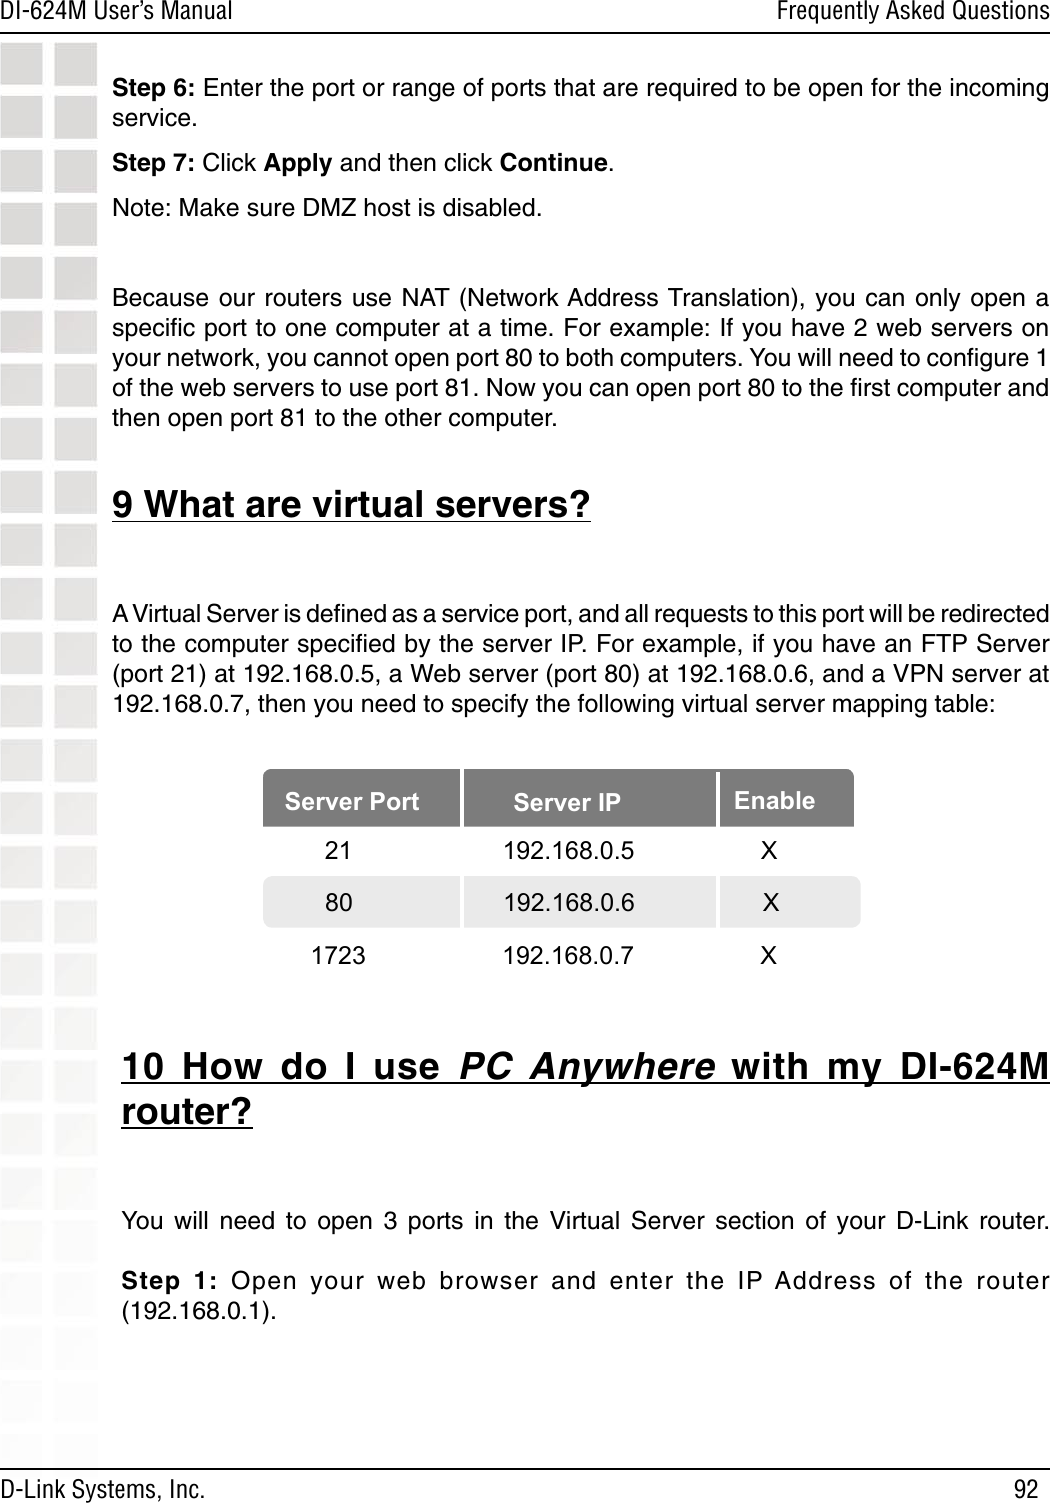 92DI-624M User’s Manual D-Link Systems, Inc.Frequently Asked QuestionsStep 6: Enter the port or range of ports that are required to be open for the incoming service. Step 7: Click Apply and then click Continue. Note: Make sure DMZ host is disabled.Because our routers use NAT  (Network Address Translation), you  can  only  open  a speciﬁc port to one computer at a time. For example: If you have 2 web servers on your network, you cannot open port 80 to both computers. You will need to conﬁgure 1 of the web servers to use port 81. Now you can open port 80 to the ﬁrst computer and then open port 81 to the other computer.  9 What are virtual servers?A Virtual Server is deﬁned as a service port, and all requests to this port will be redirected to the computer speciﬁed by the server IP. For example, if you have an FTP Server (port 21) at 192.168.0.5, a Web server (port 80) at 192.168.0.6, and a VPN server at 192.168.0.7, then you need to specify the following virtual server mapping table:10  How  do  I  use  PC  Anywhere  with  my  DI-624M router?You  will  need  to  open  3  ports  in  the  Virtual Server  section  of  your  D-Link  router.   Step  1:  Open  your  web  browser  and  enter  the  IP Address  of  the  router (192.168.0.1).Server Port Server IP Enable  21         192.168.0.5    X80       192.168.0.6           X1723         192.168.0.7    X